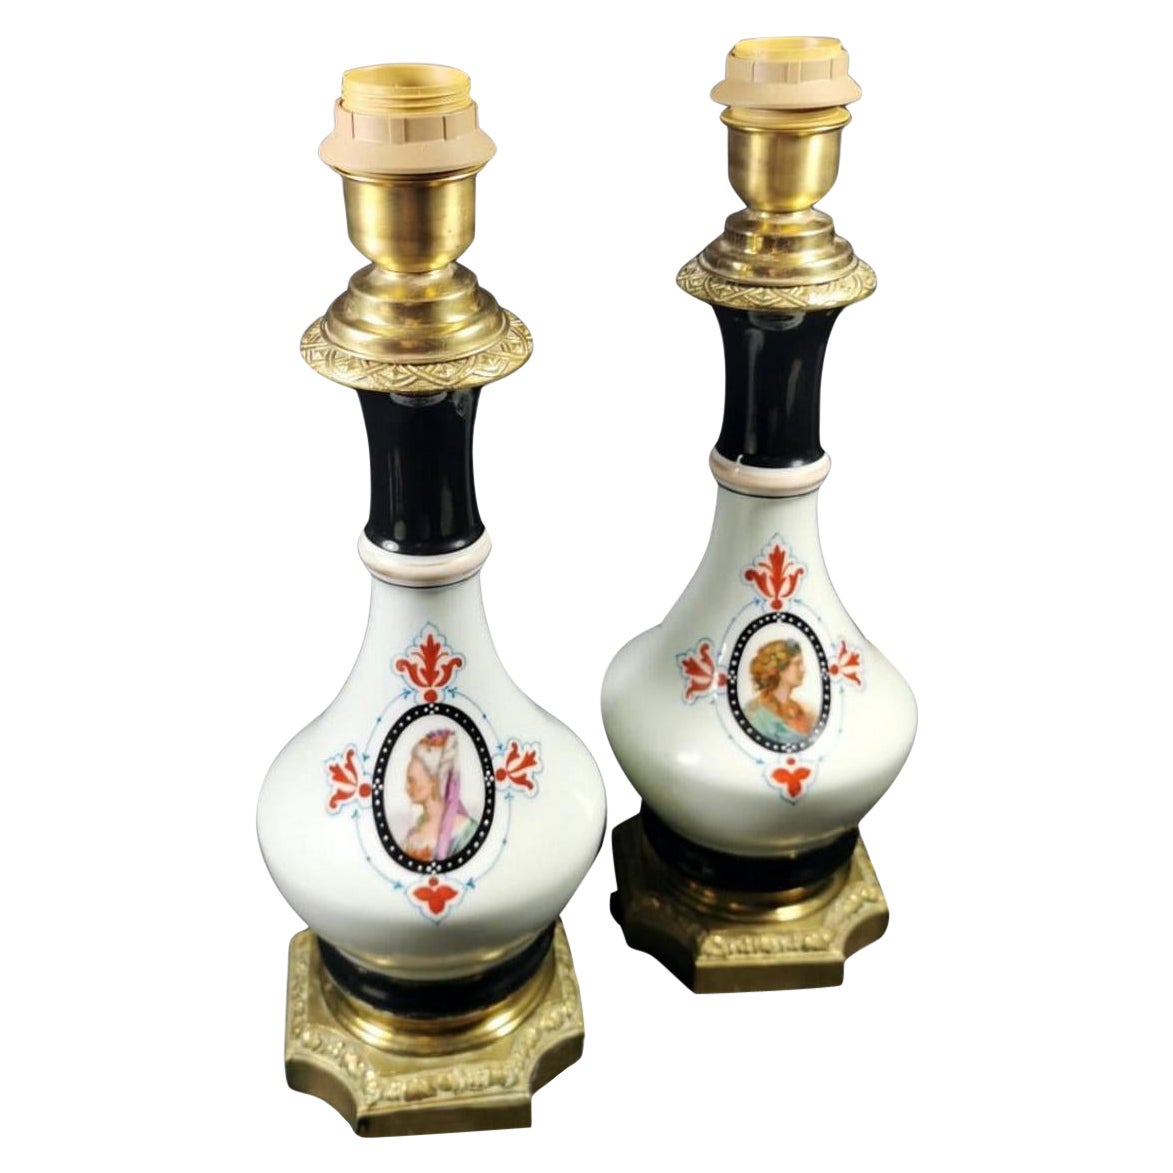 Porcelain de Paris Napoleon III French Pair of Oil Lamps 'Without Lampshade' For Sale